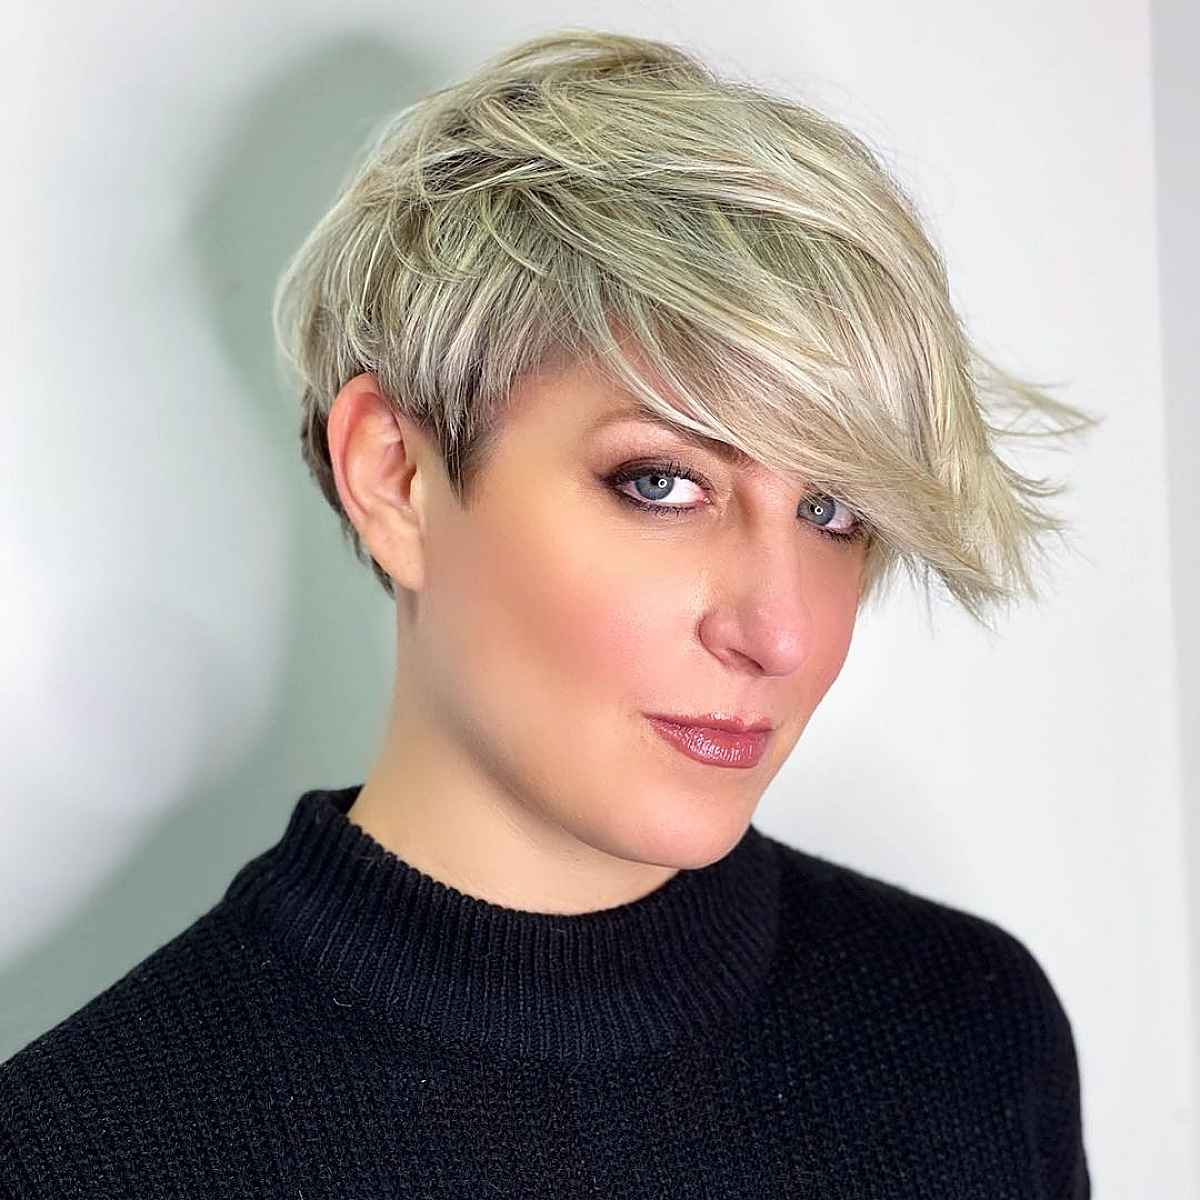 Blonde Pixie with Long Side-Swept Bangs